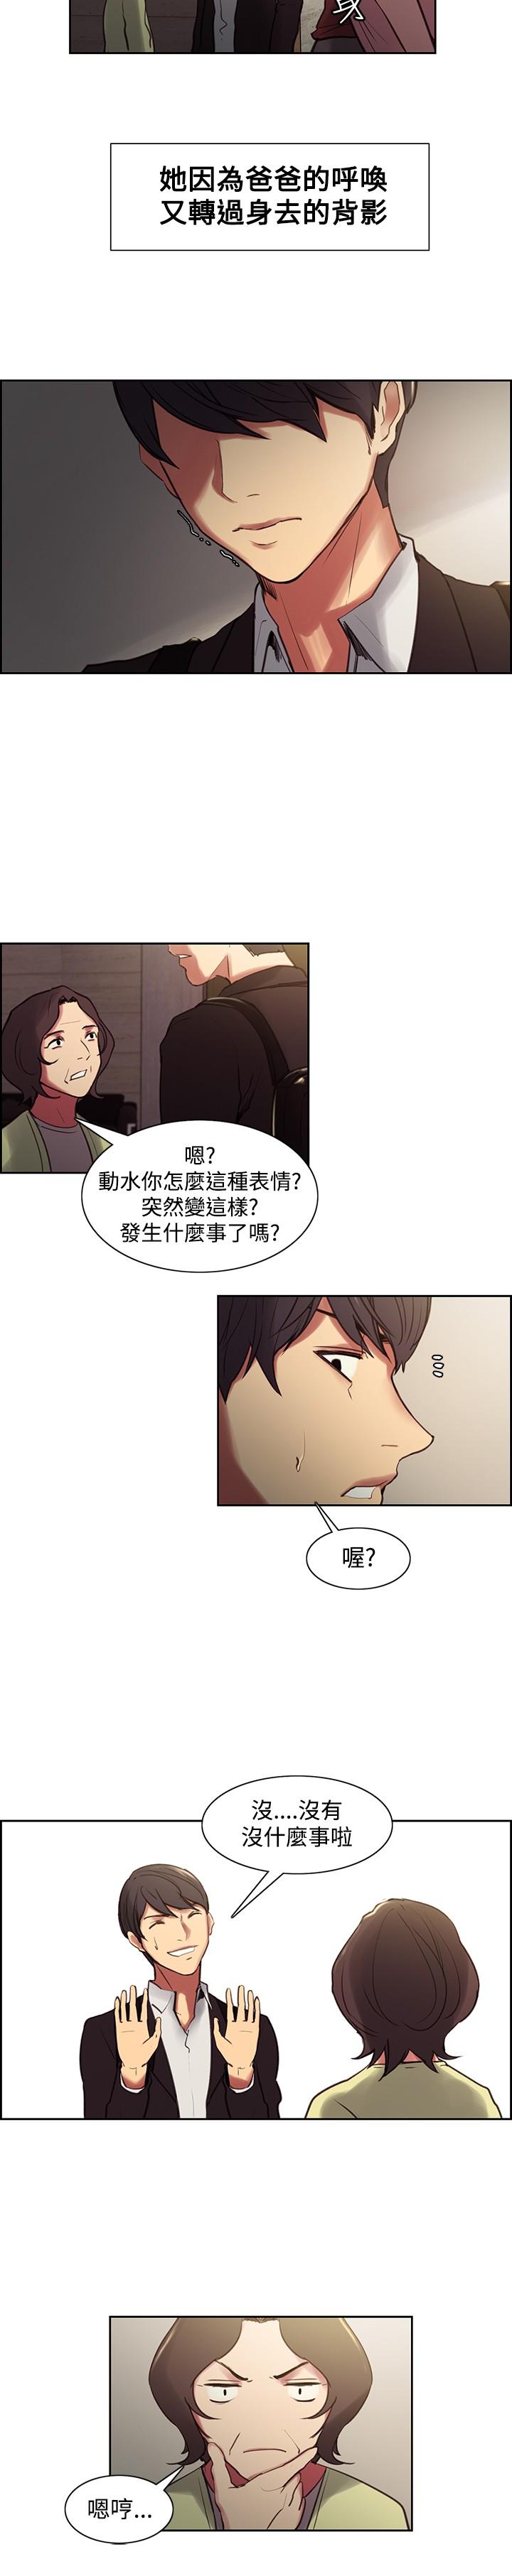 [Serious] Domesticate the Housekeeper 调教家政妇 Ch.29~44END [Chinese]中文 129